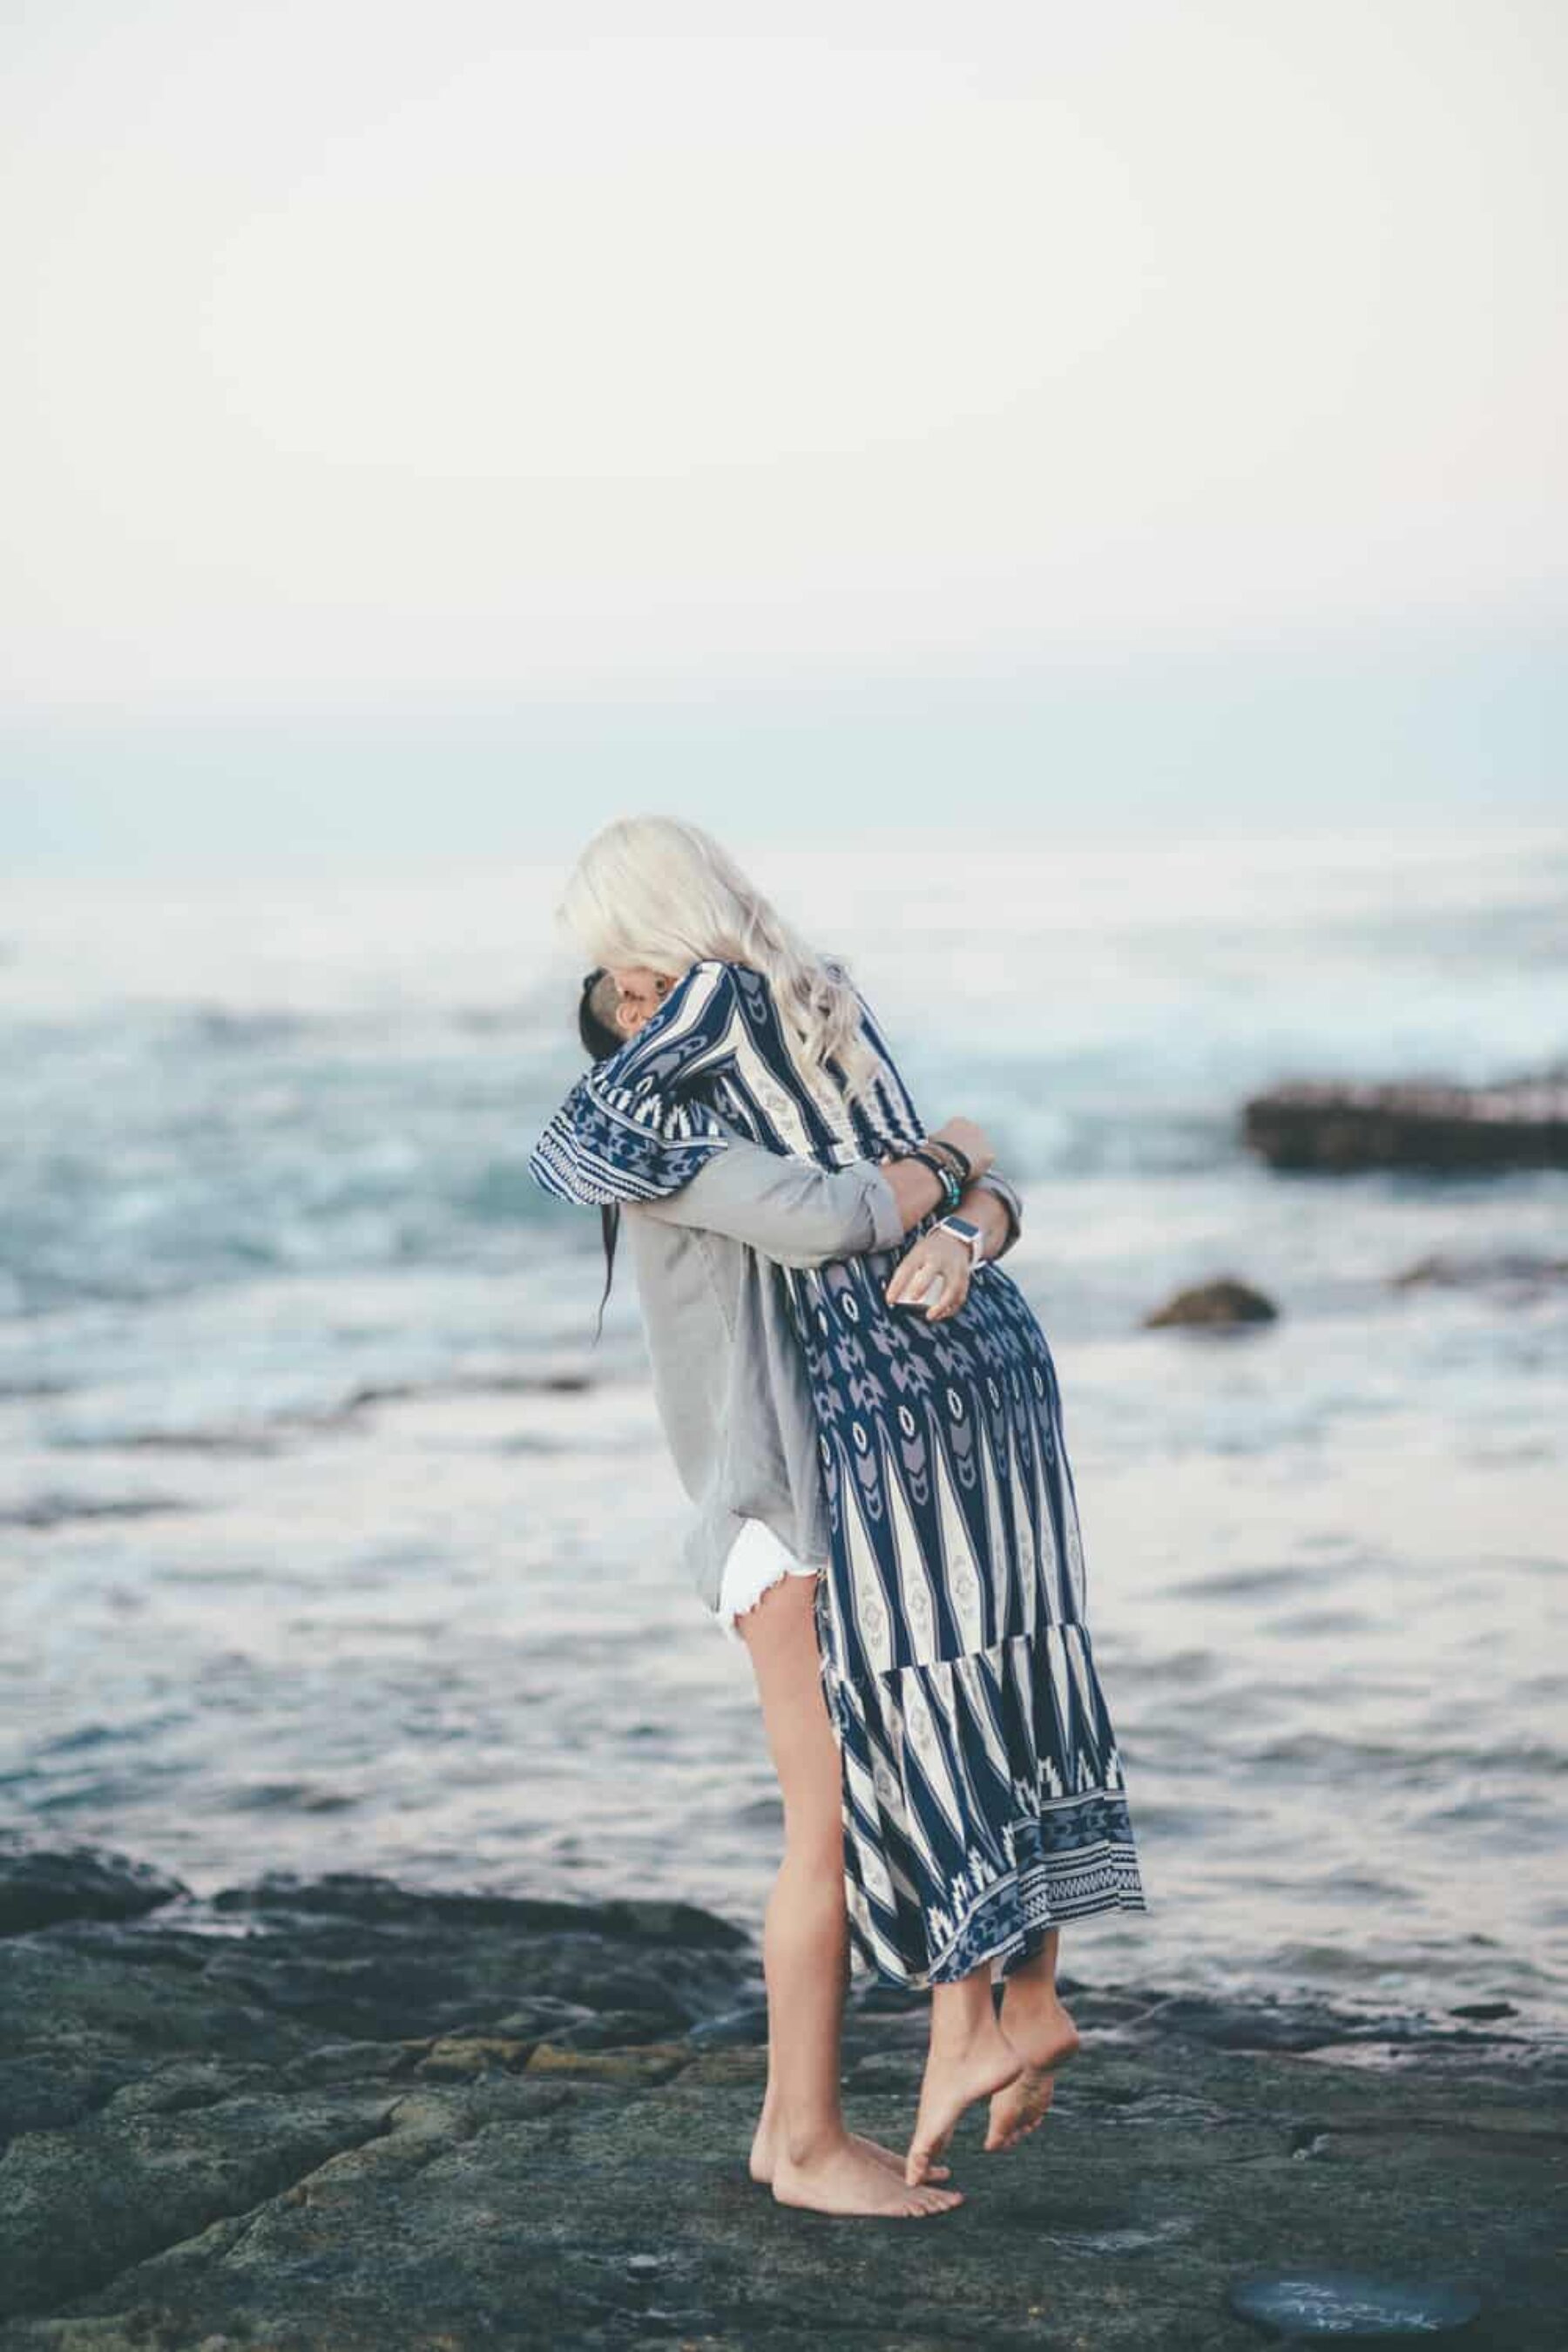 Surprise beach proposal shoot by Talitha Crawford